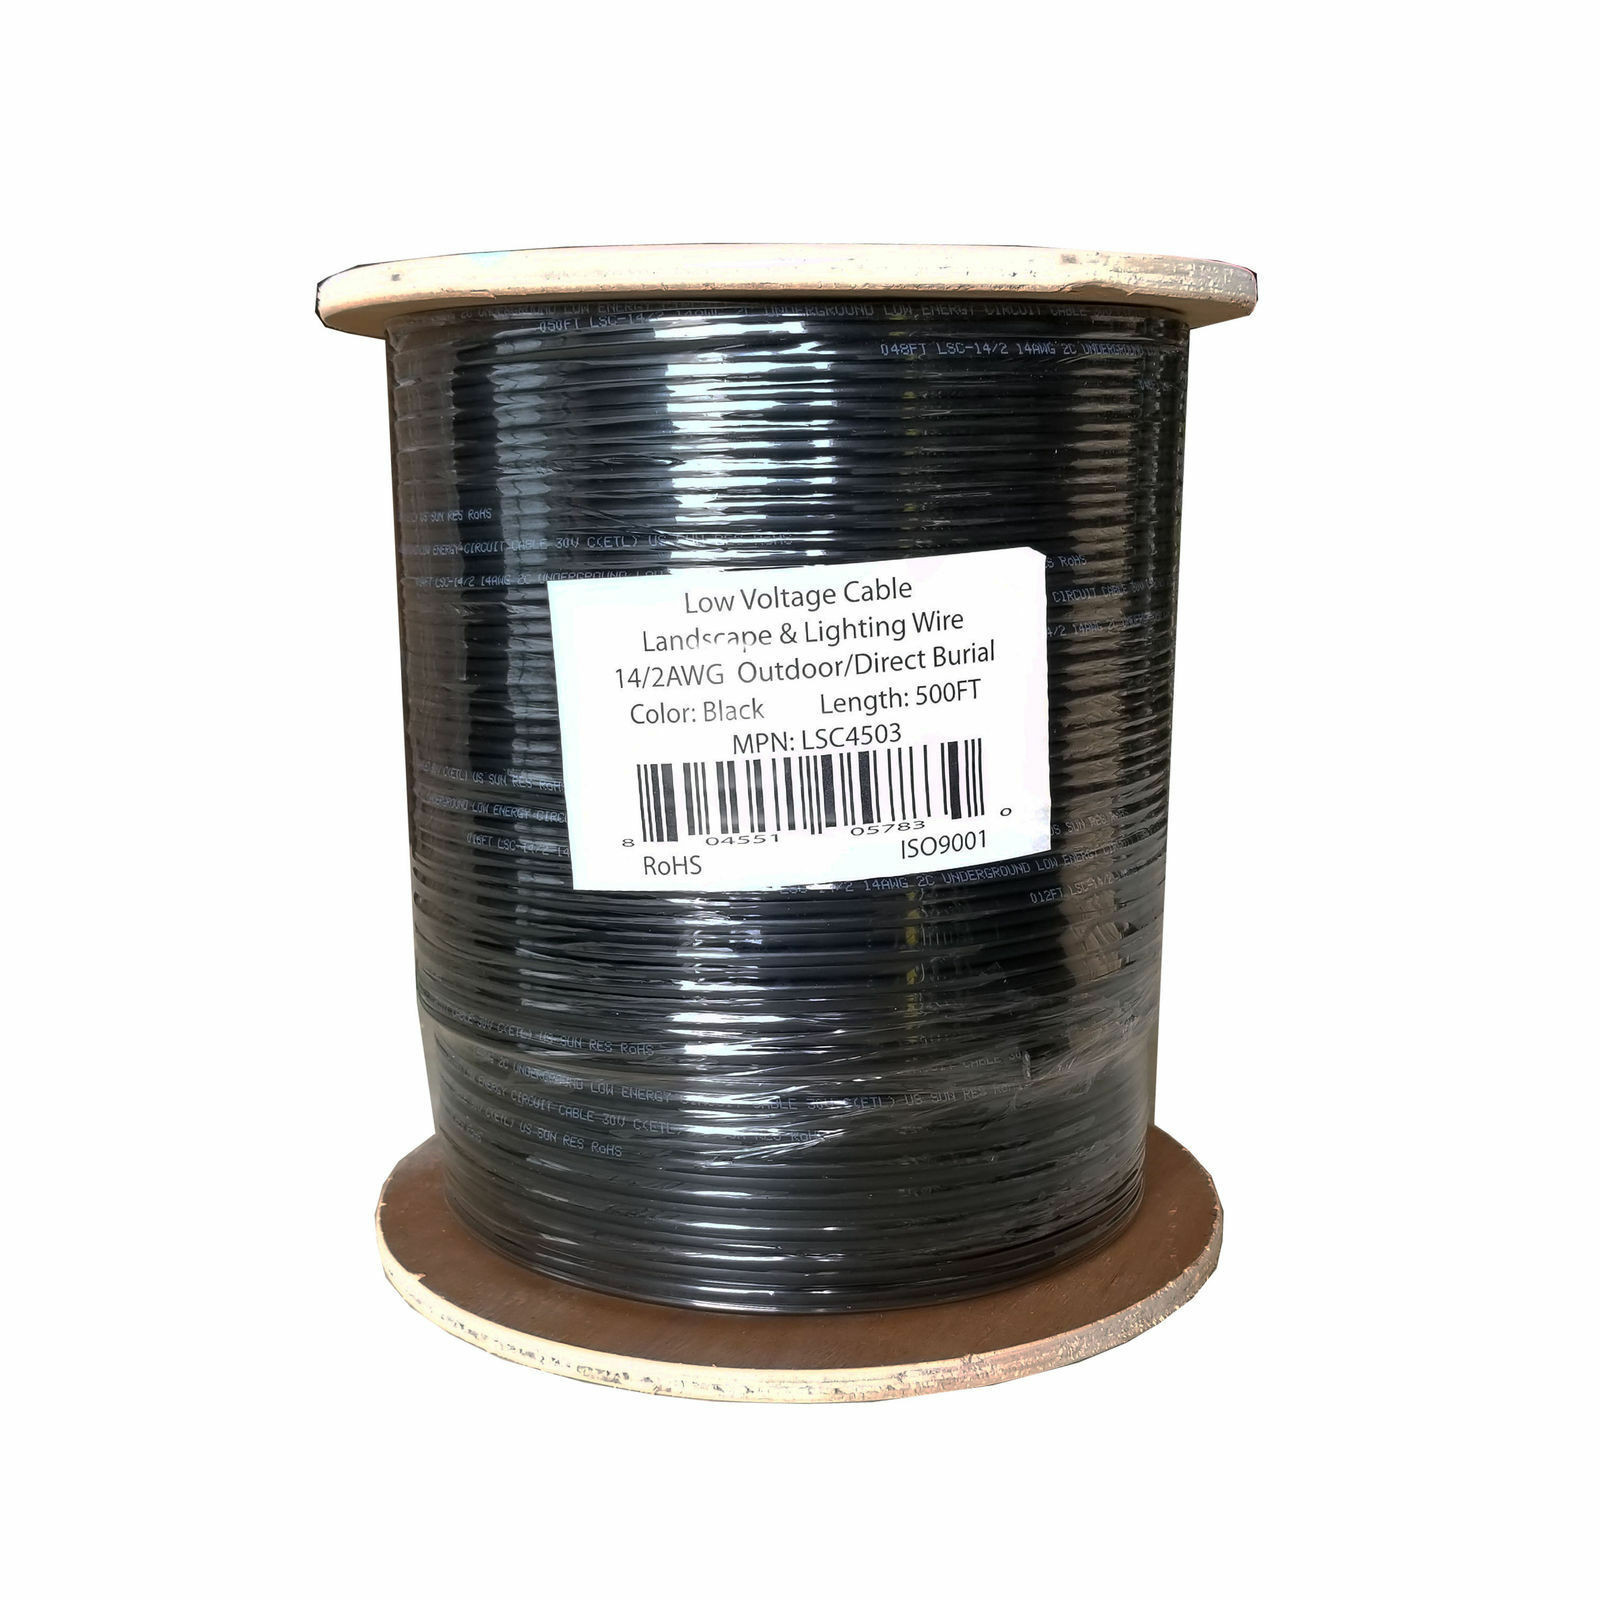 Landscape Lighting Wire
 Landscape Cable 500FT 10 2 Outdoor Lighting Wire Direct